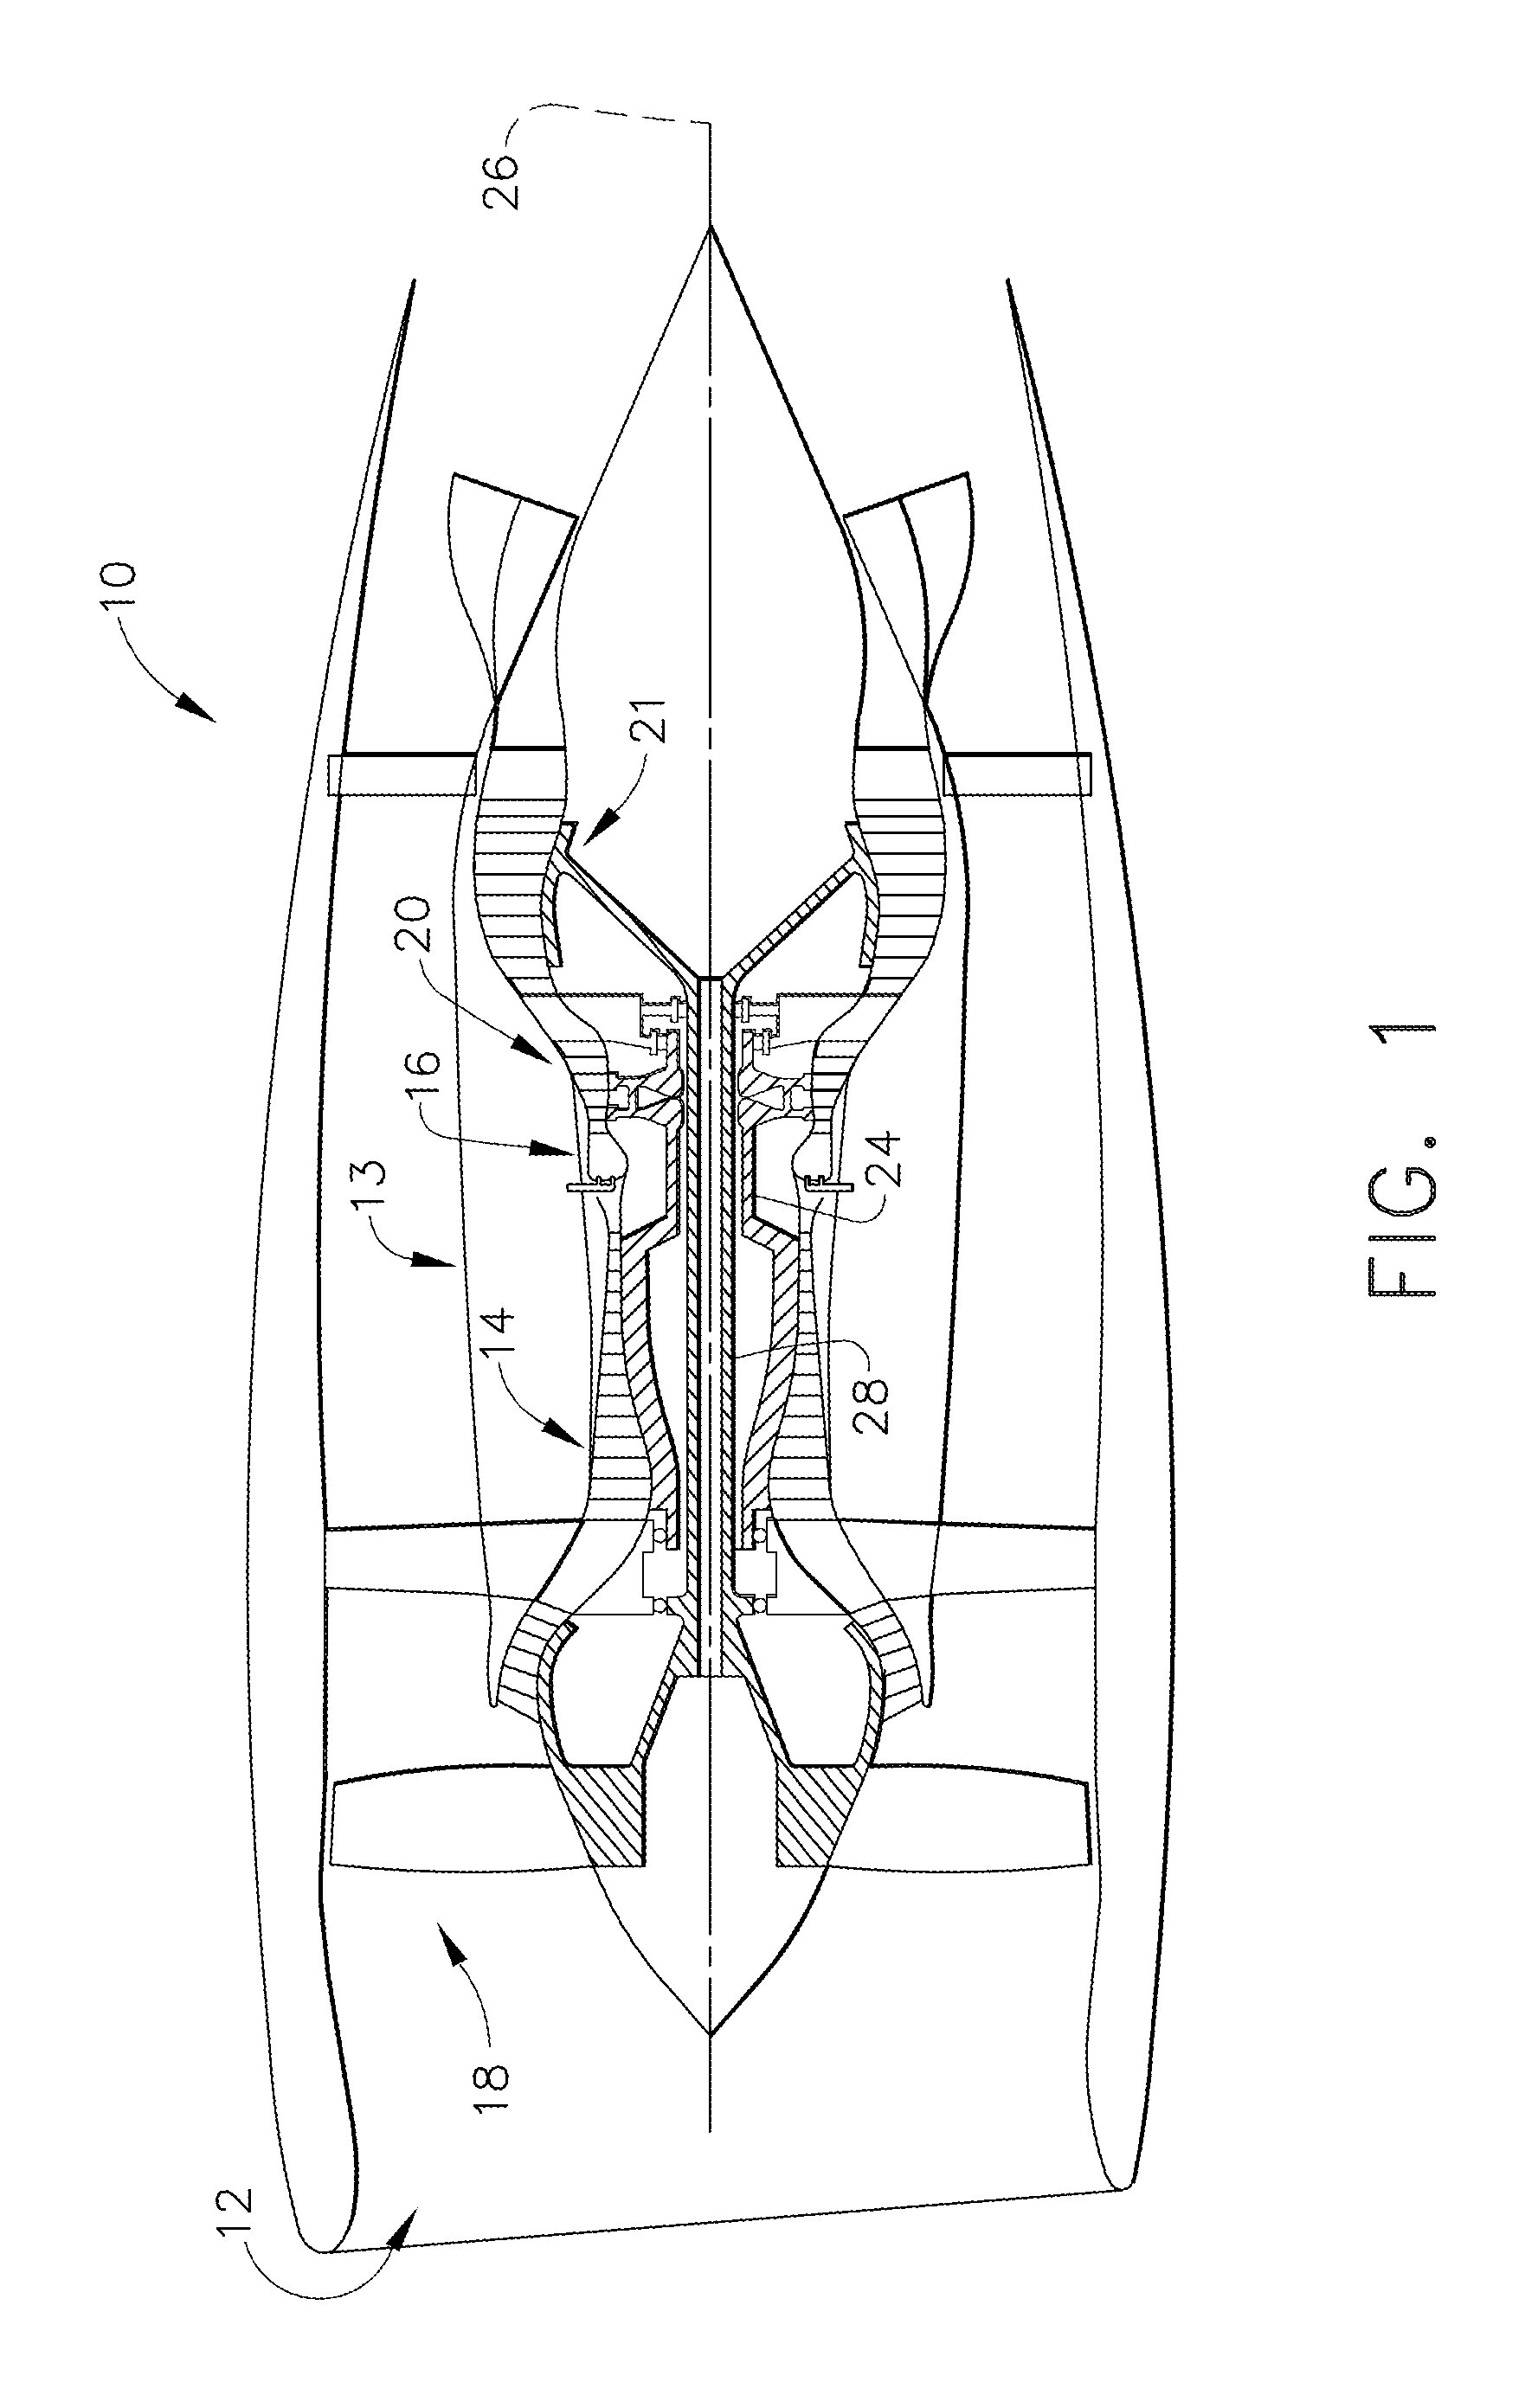 Composite airfoil metal leading edge assembly